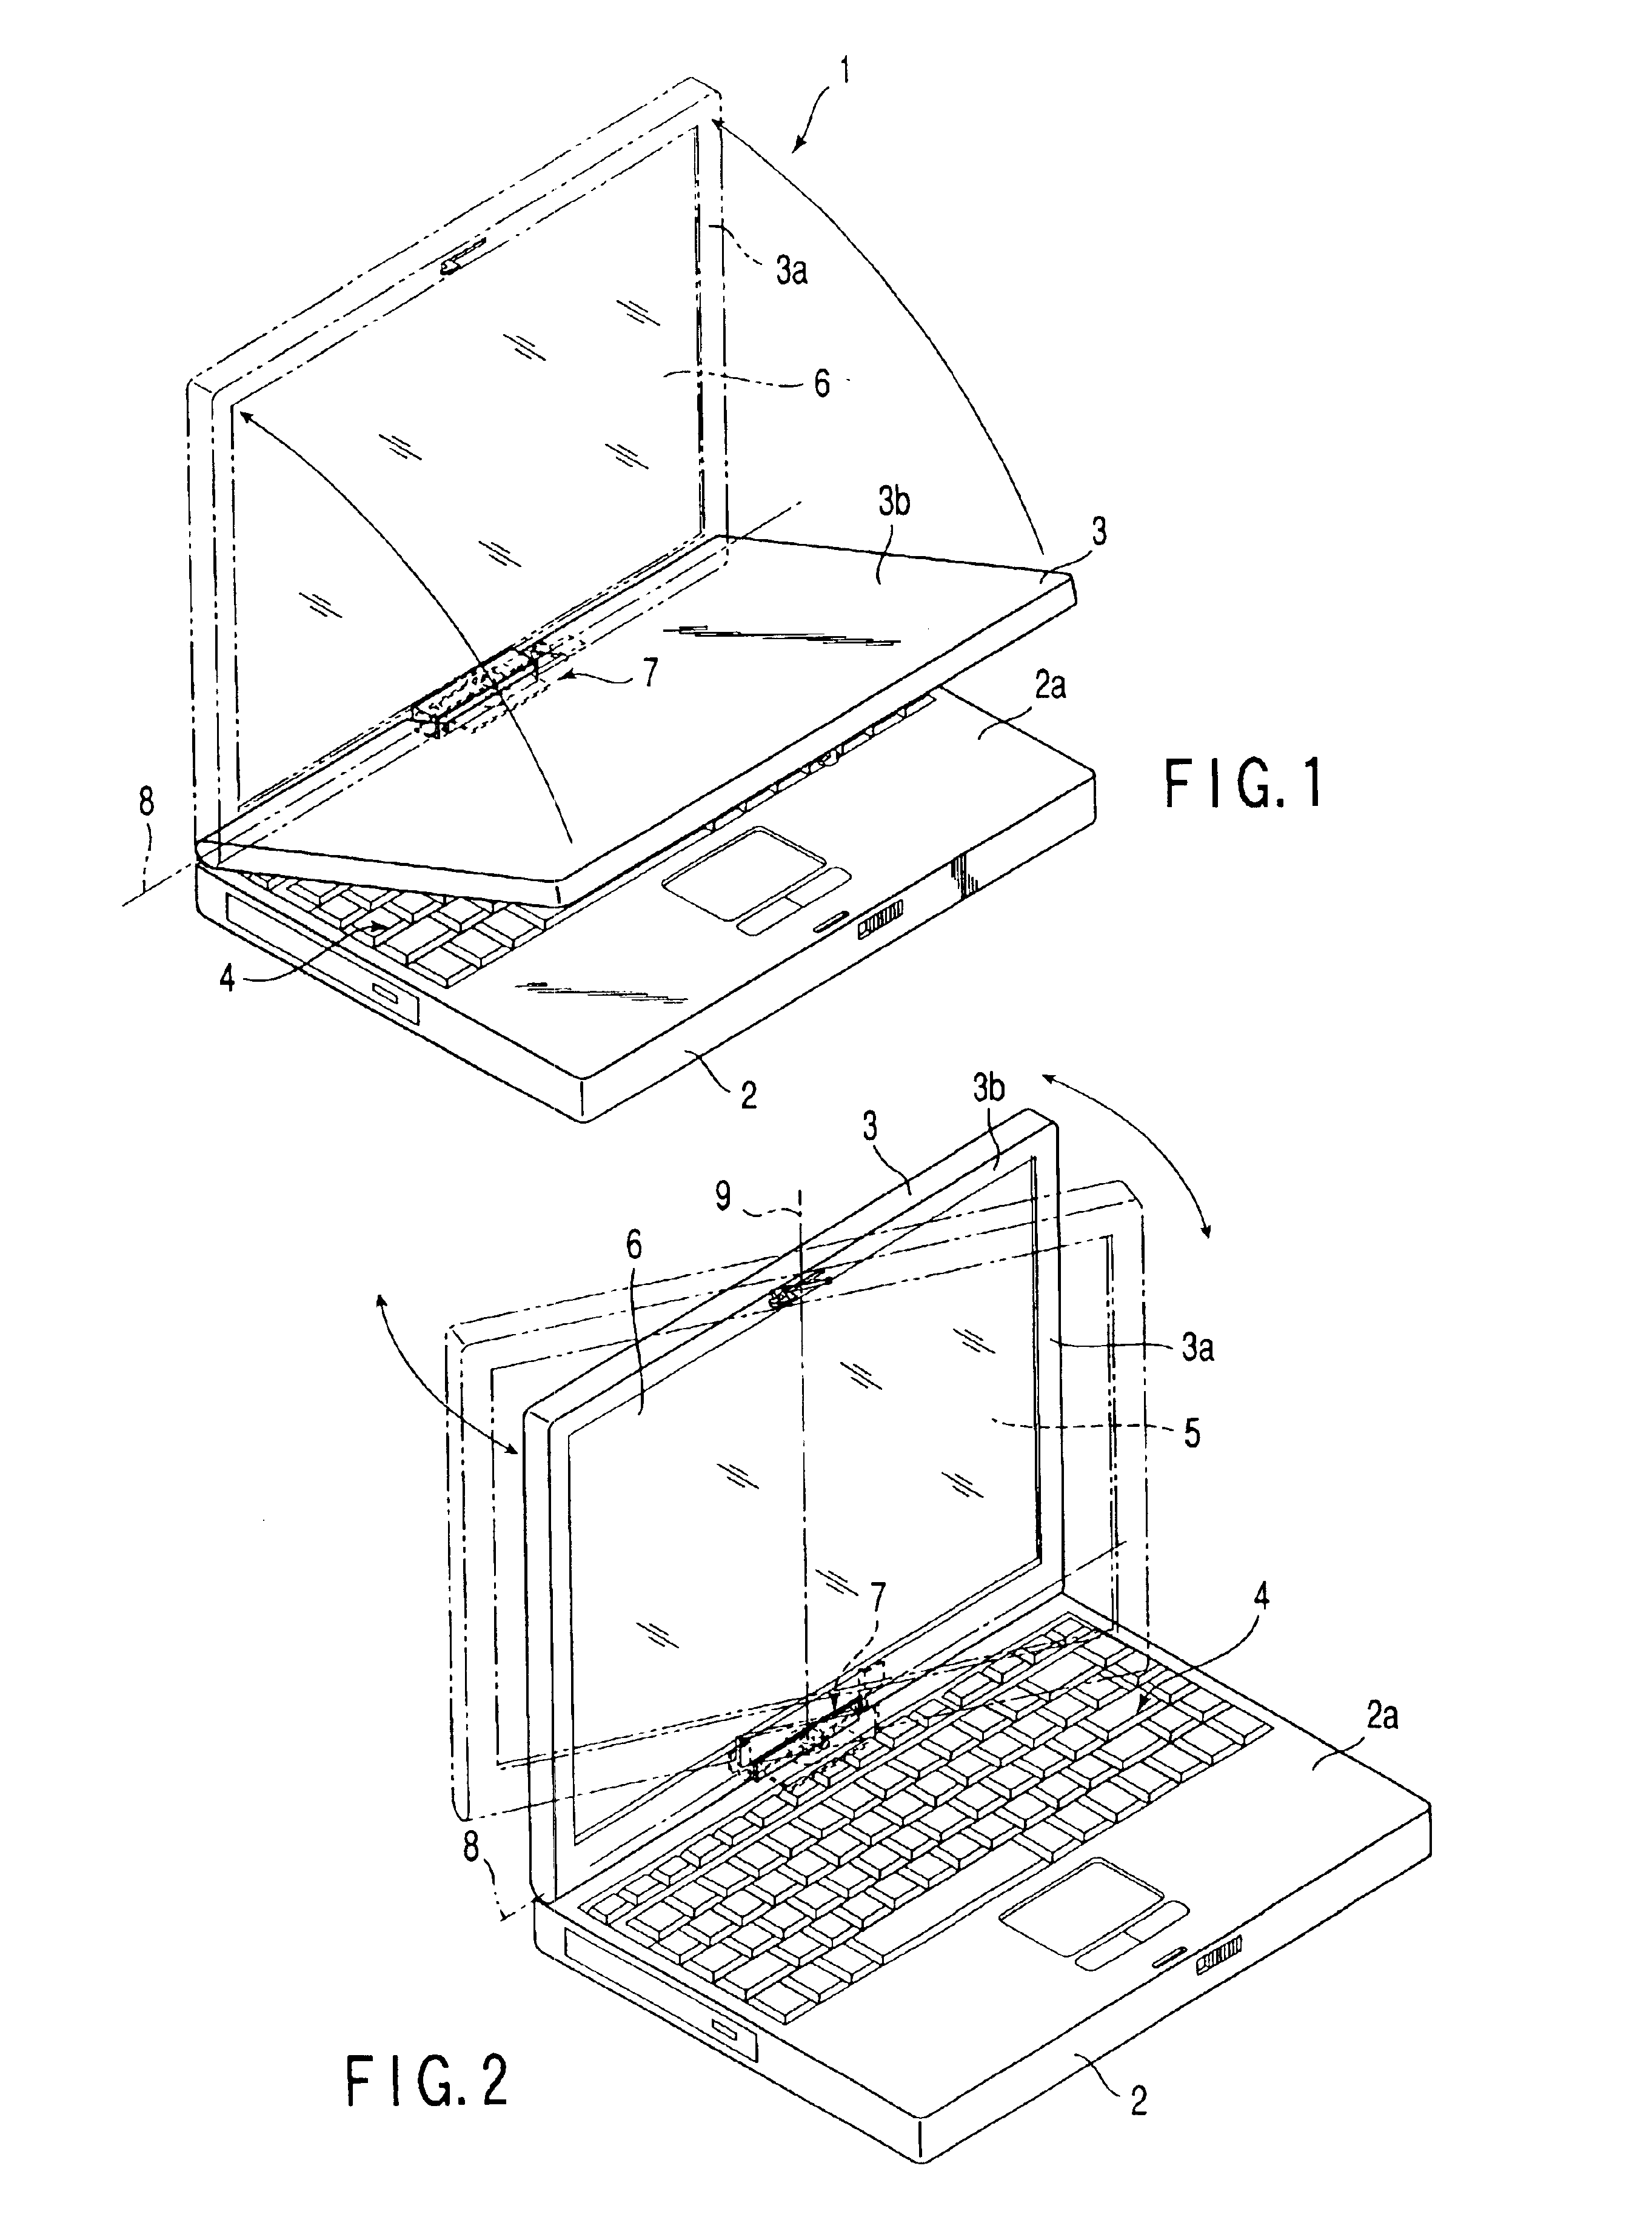 Electronic apparatus having two housings coupled by hinge mechanism, one of which is reversible to the other